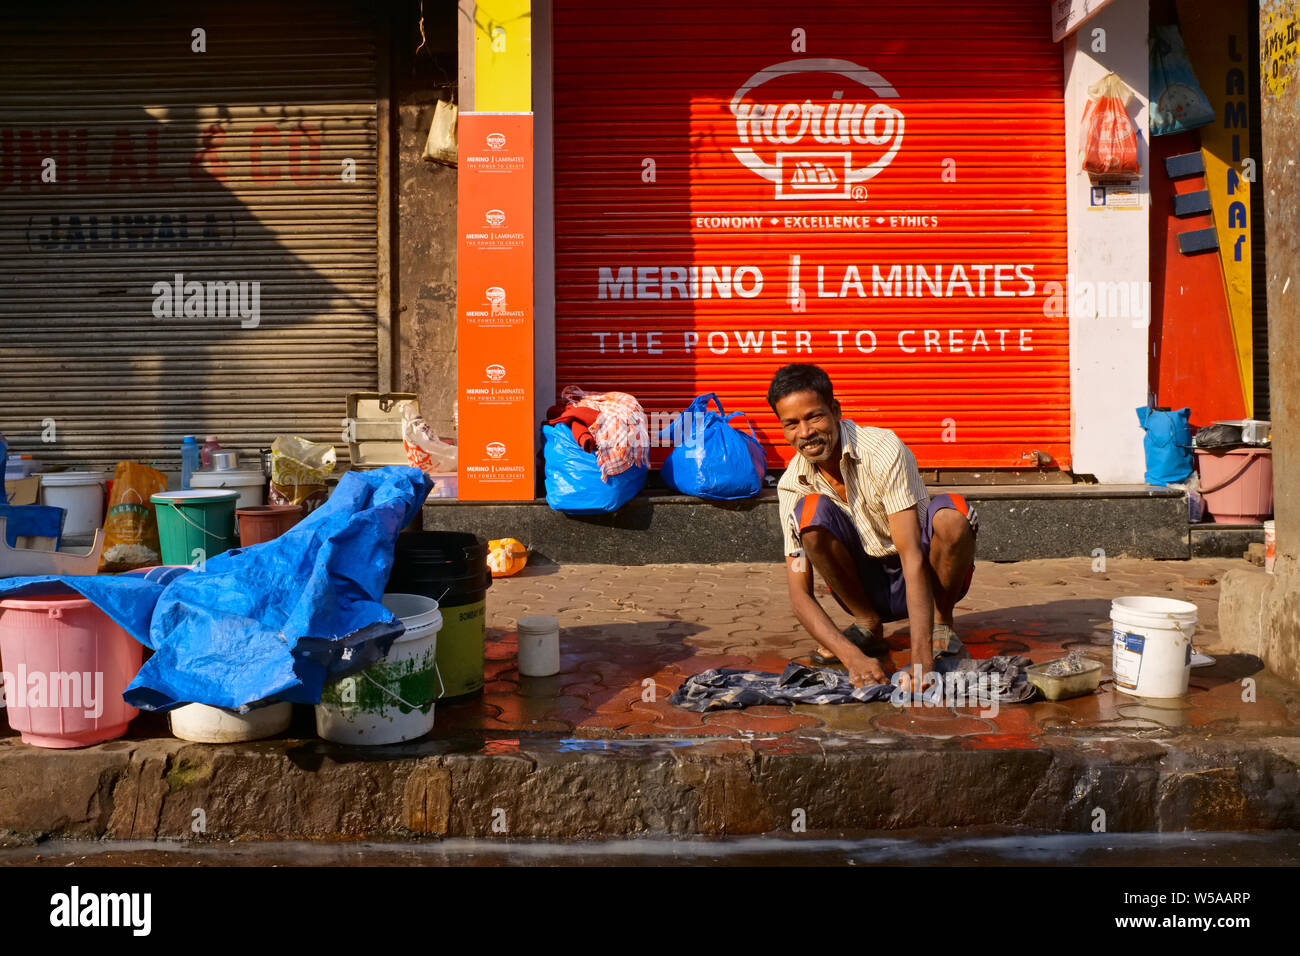 On a work-free Sunday, a migrant handcart puller from Northern India in Mumbai, India, is doing his laundry near his sleeping spot on the foothpath Stock Photo